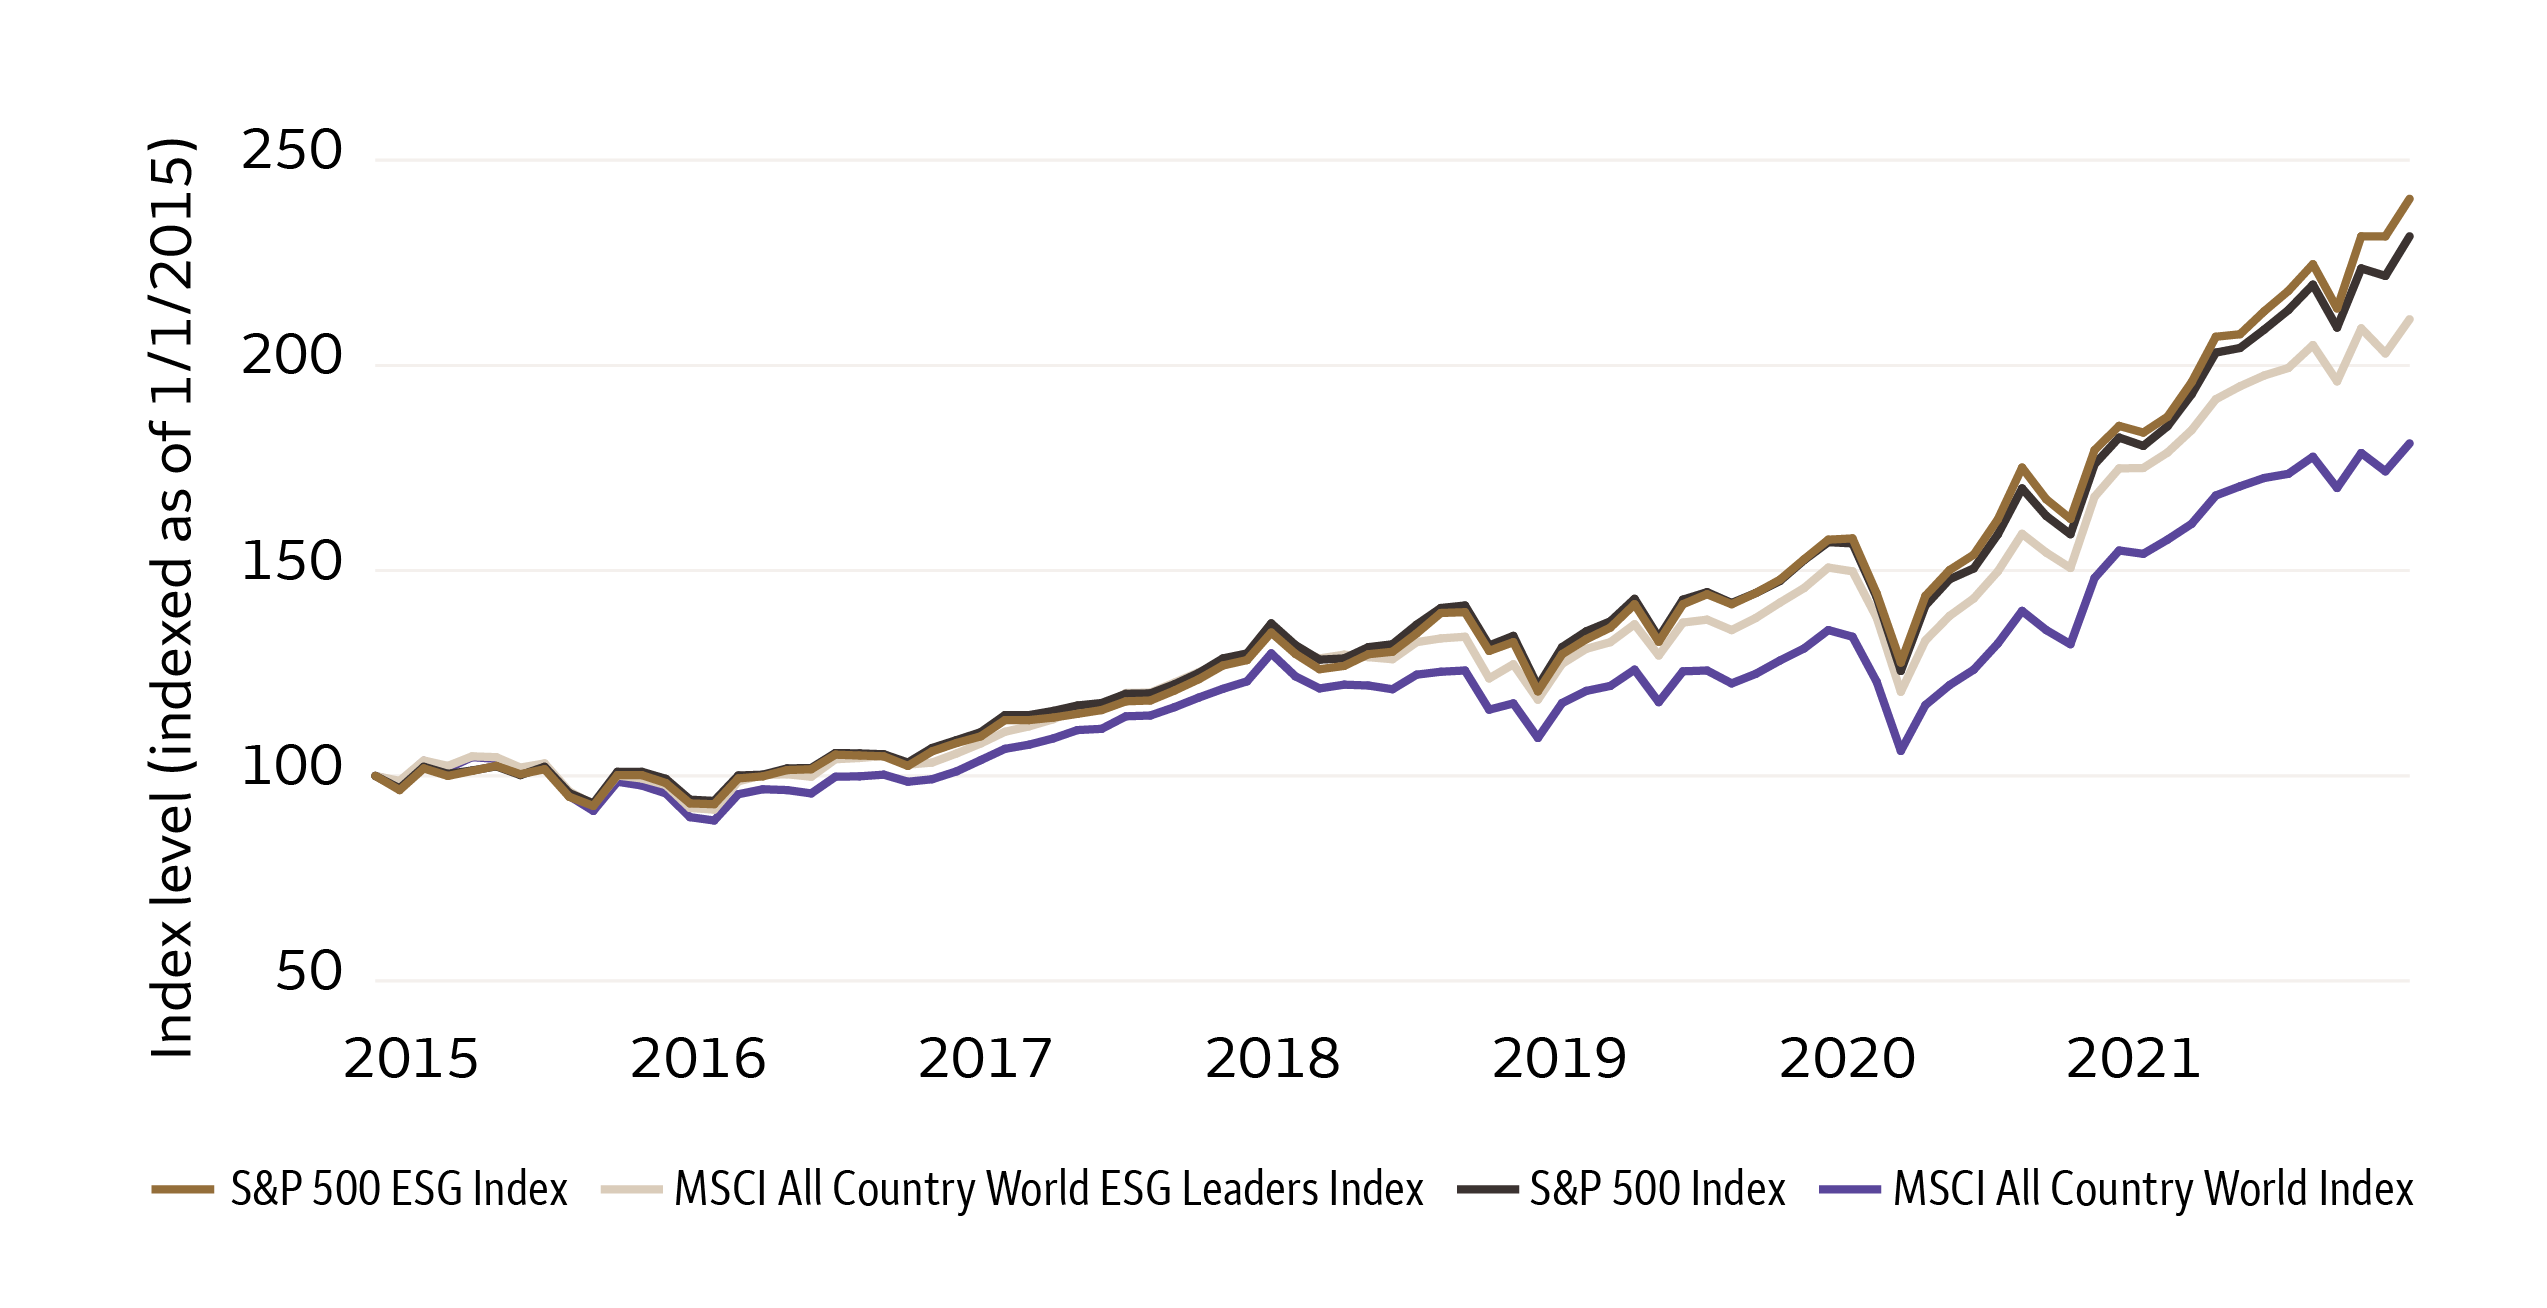 This chart shows the performance of the S&P 500 index, MSCI All Country World index, MSCI ACWI ESG Leaders index, and the S&P 500 ESG index in the form of line charts. The horizontal axis shows years and the vertical axis shows index level. These indices are indexed at 100 with the S&P 500 ESG index outperforming the others from 1/1/2015 to– 12/31/2021. All four lines appear relatively flat through 2016, and then start to rise gradually in 2017 to around 125-130. Between 2018 and 2020 the MSCI All Country World Index line lags the other three index lines and starts to diverge. All lines show a bit of fluctuation over this period. The S&P 500 index, MSCI ACWI ESG Leaders index, and the S&P 500 ESG index rise to around 150-155 by the end of 2019. The MSCI All Country World index lags at around 130. All four lines show a dip in March 2020 due to the pandemic, and then all four lines climb through year-end 2021 with a few slight pullbacks over the period. At the end of 2021, the S&P 500 index and the S&P 500 ESG index are above 200, the MSCI ACWI ESG Leaders index line is 200, and the MSCI All Country World index lags the others and is around 170.